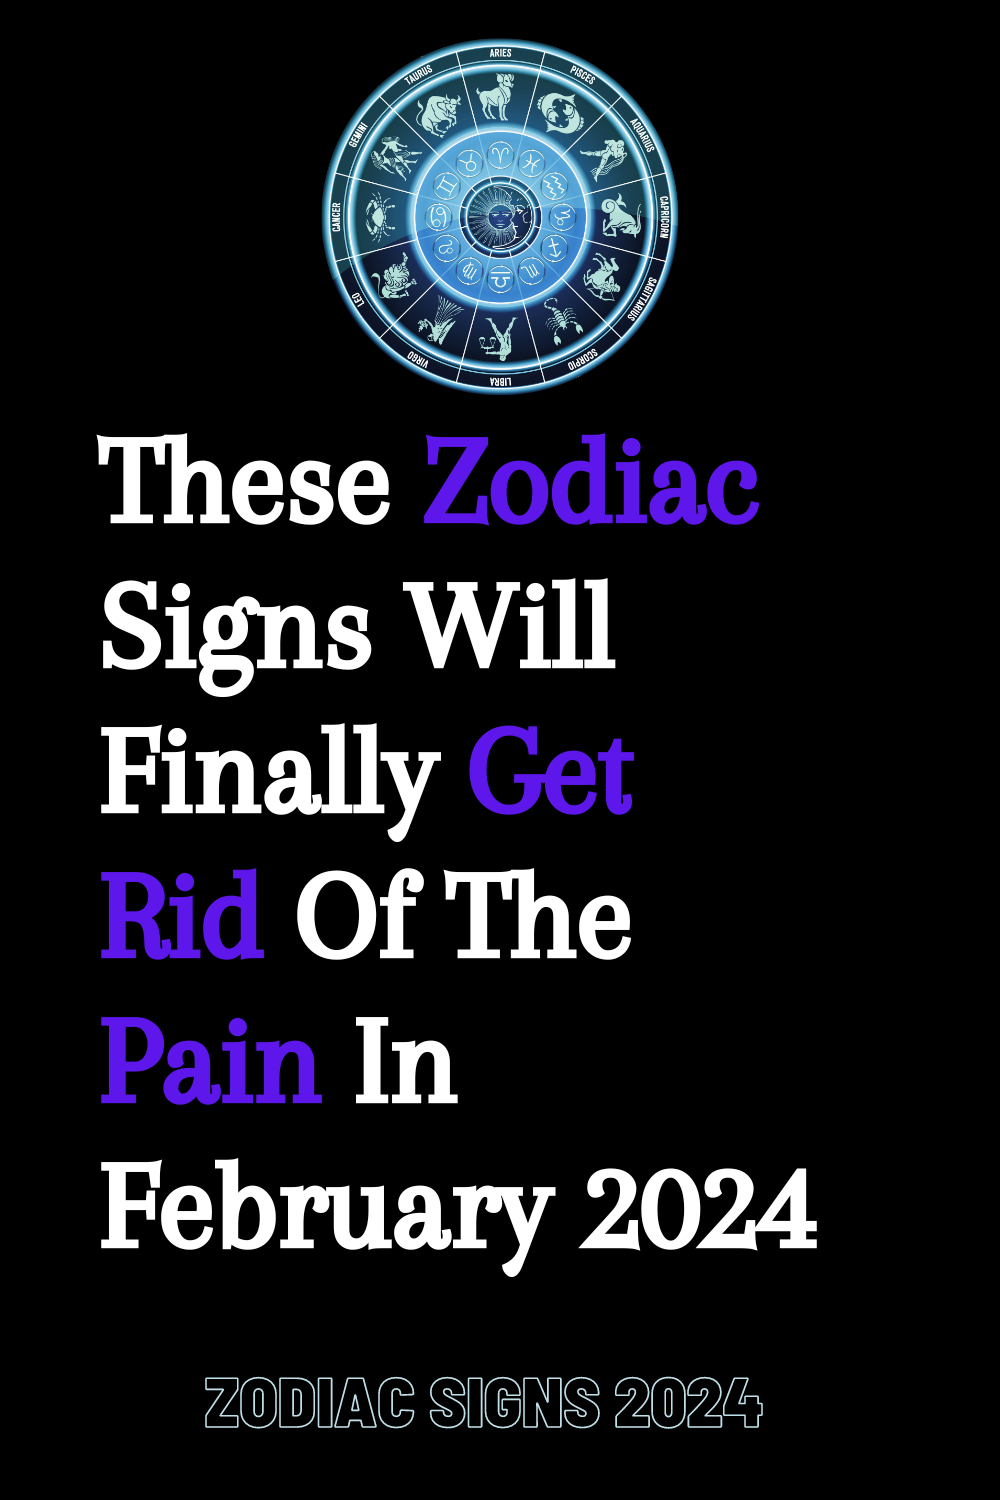 These Zodiac Signs Will Finally Get Rid Of The Pain In February 2024